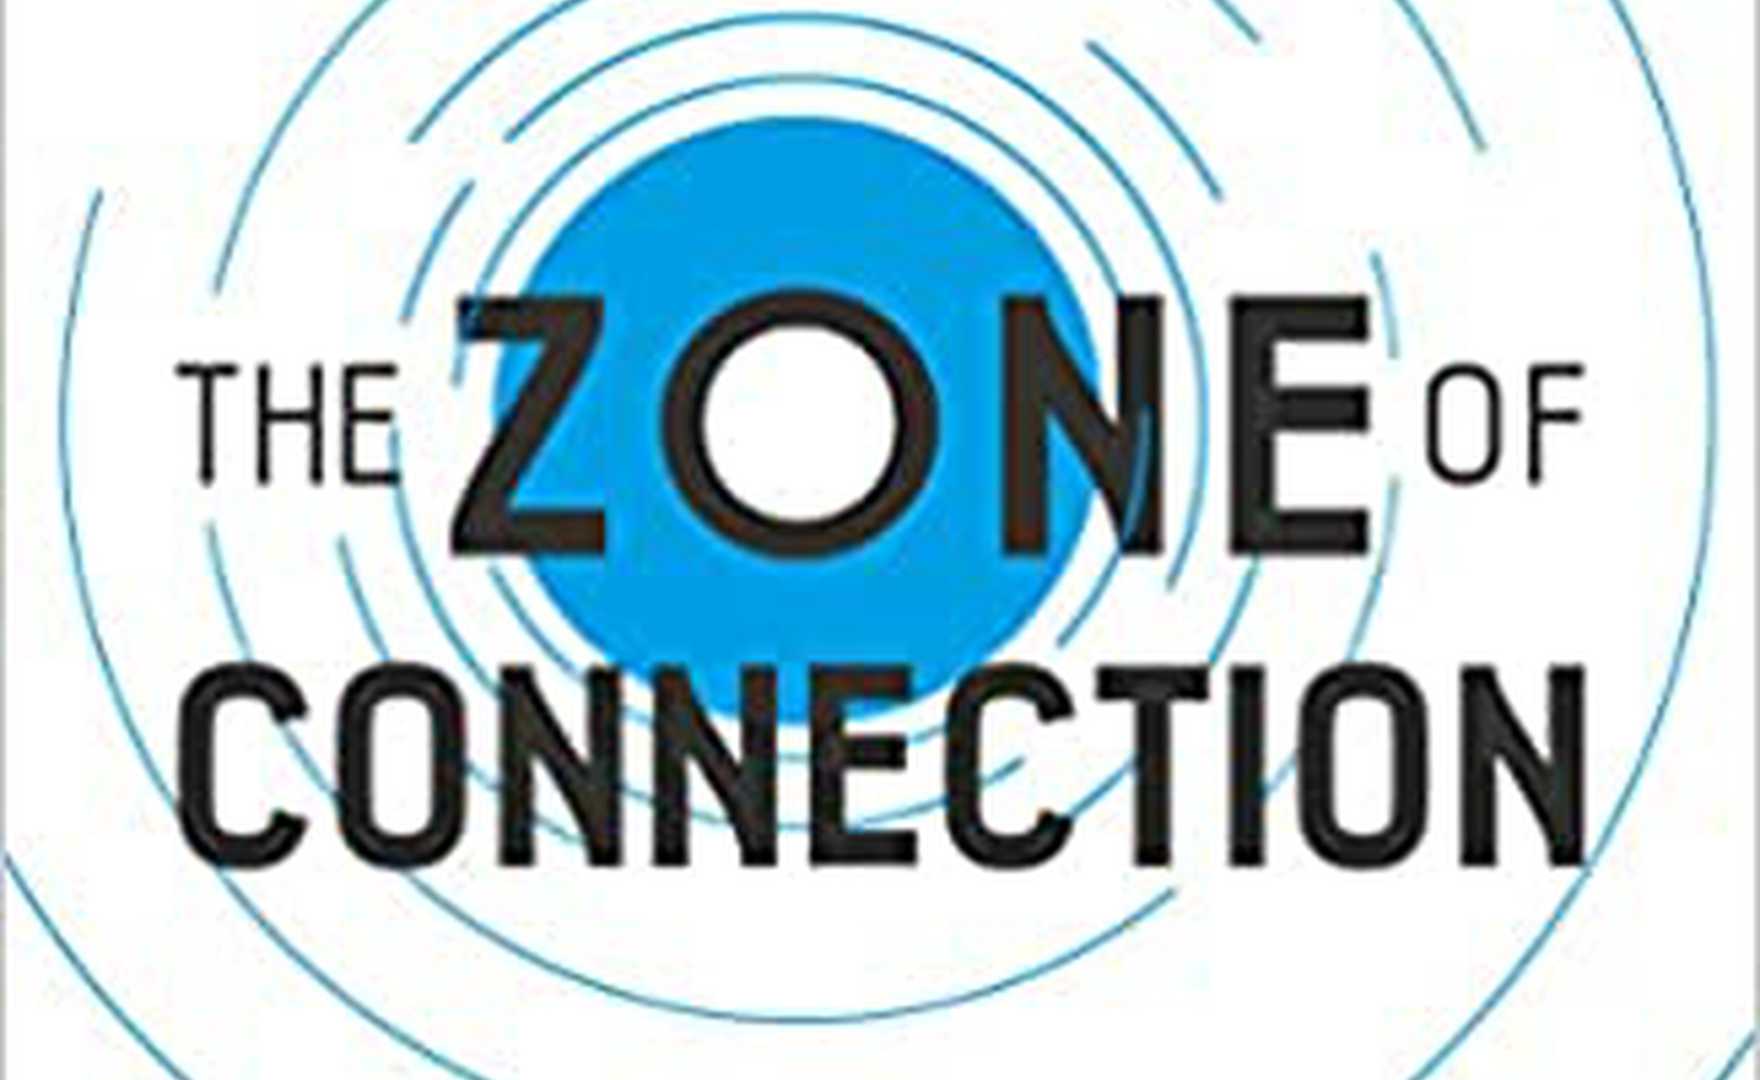 Book review - Zone of Connection by Sue Coyne